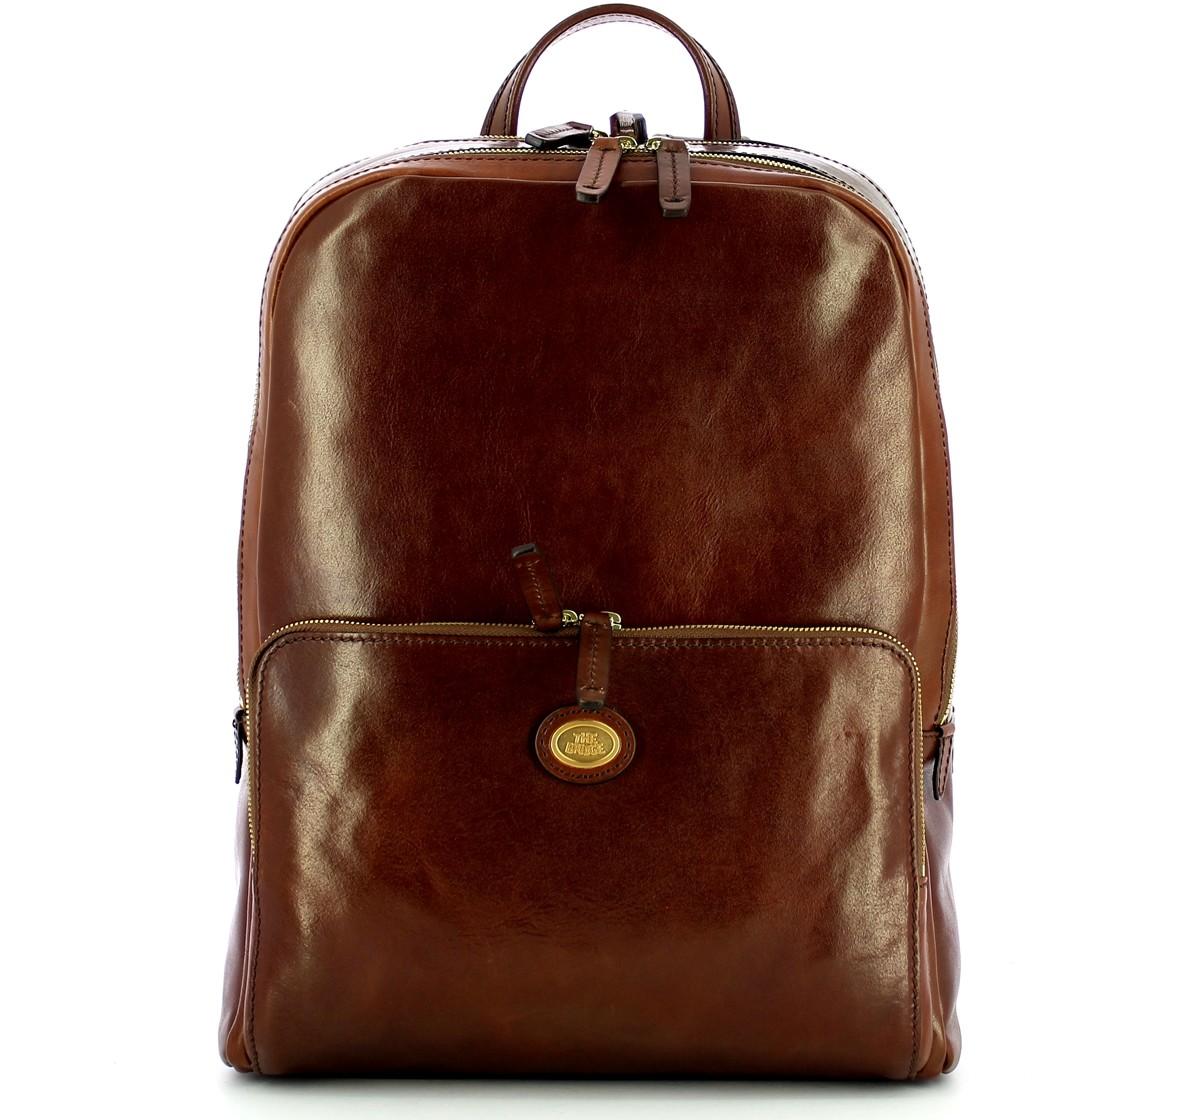 The Bridge Brown Leather 2 Zip Story Uomo Backpack at FORZIERI